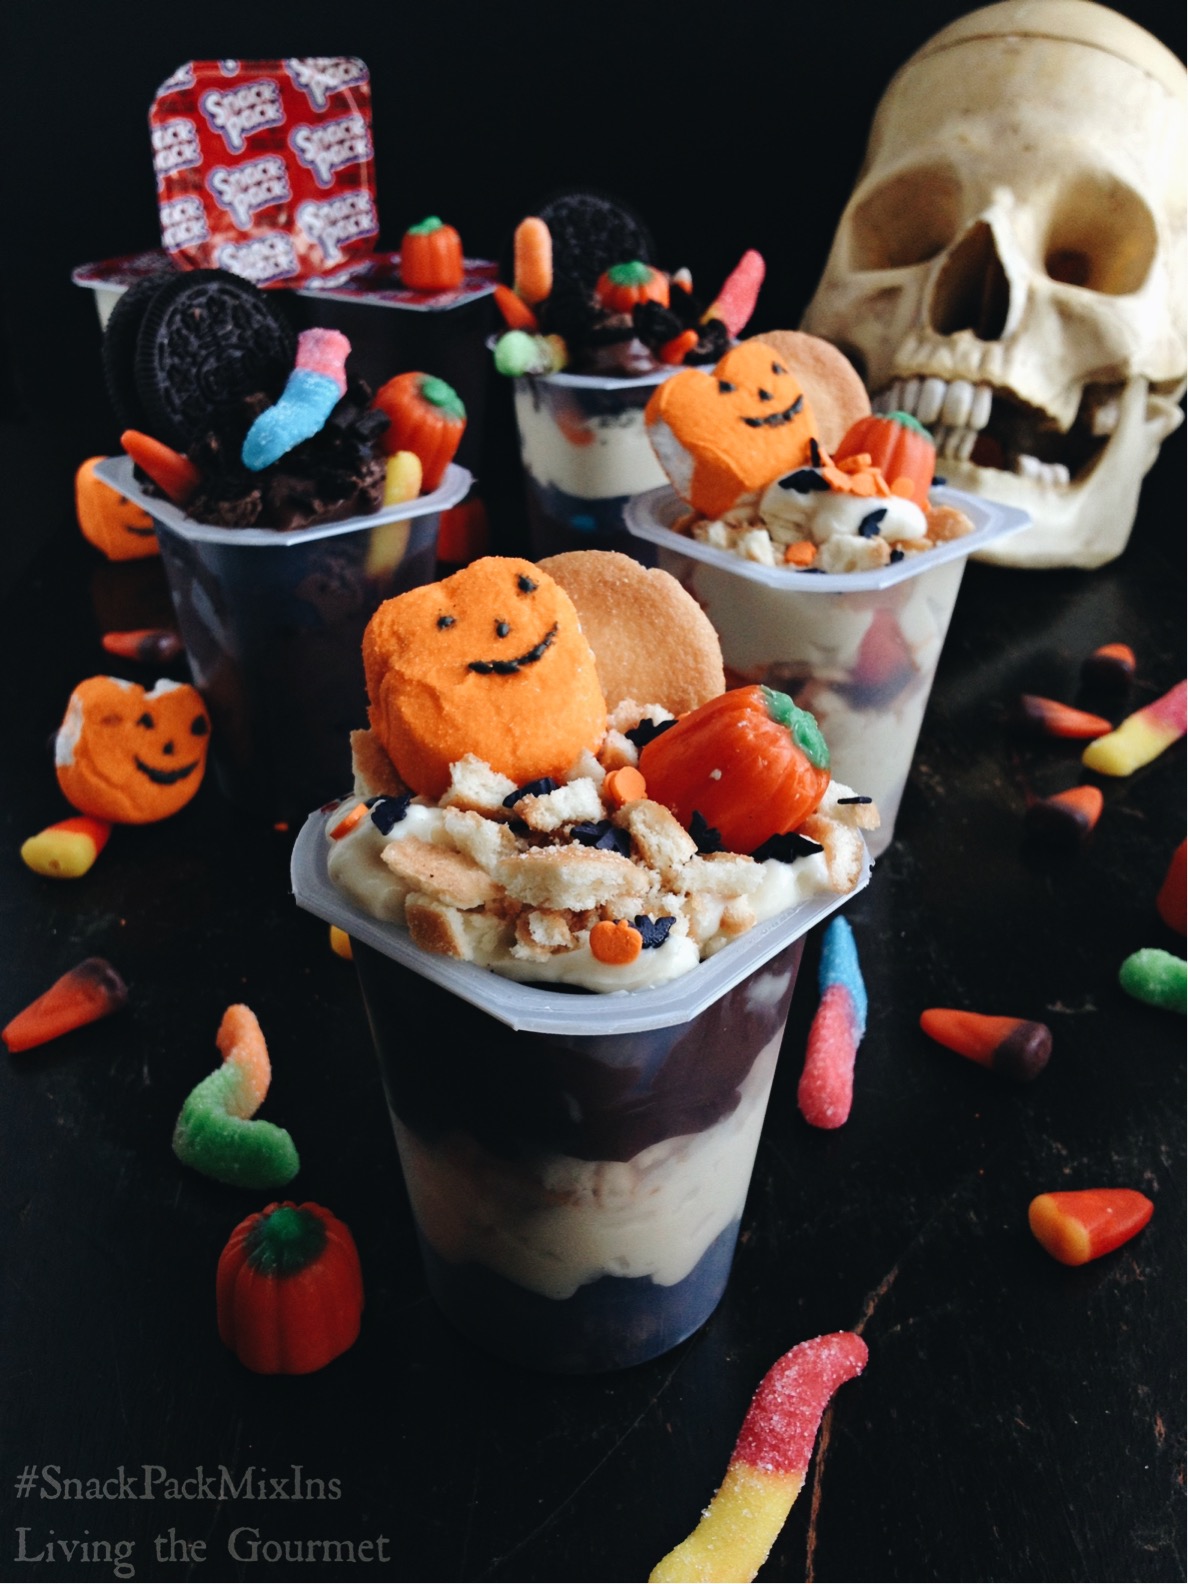 Living the Gourmet: Layered Halloween Pudding Cups | #SnackPackMixIns AD